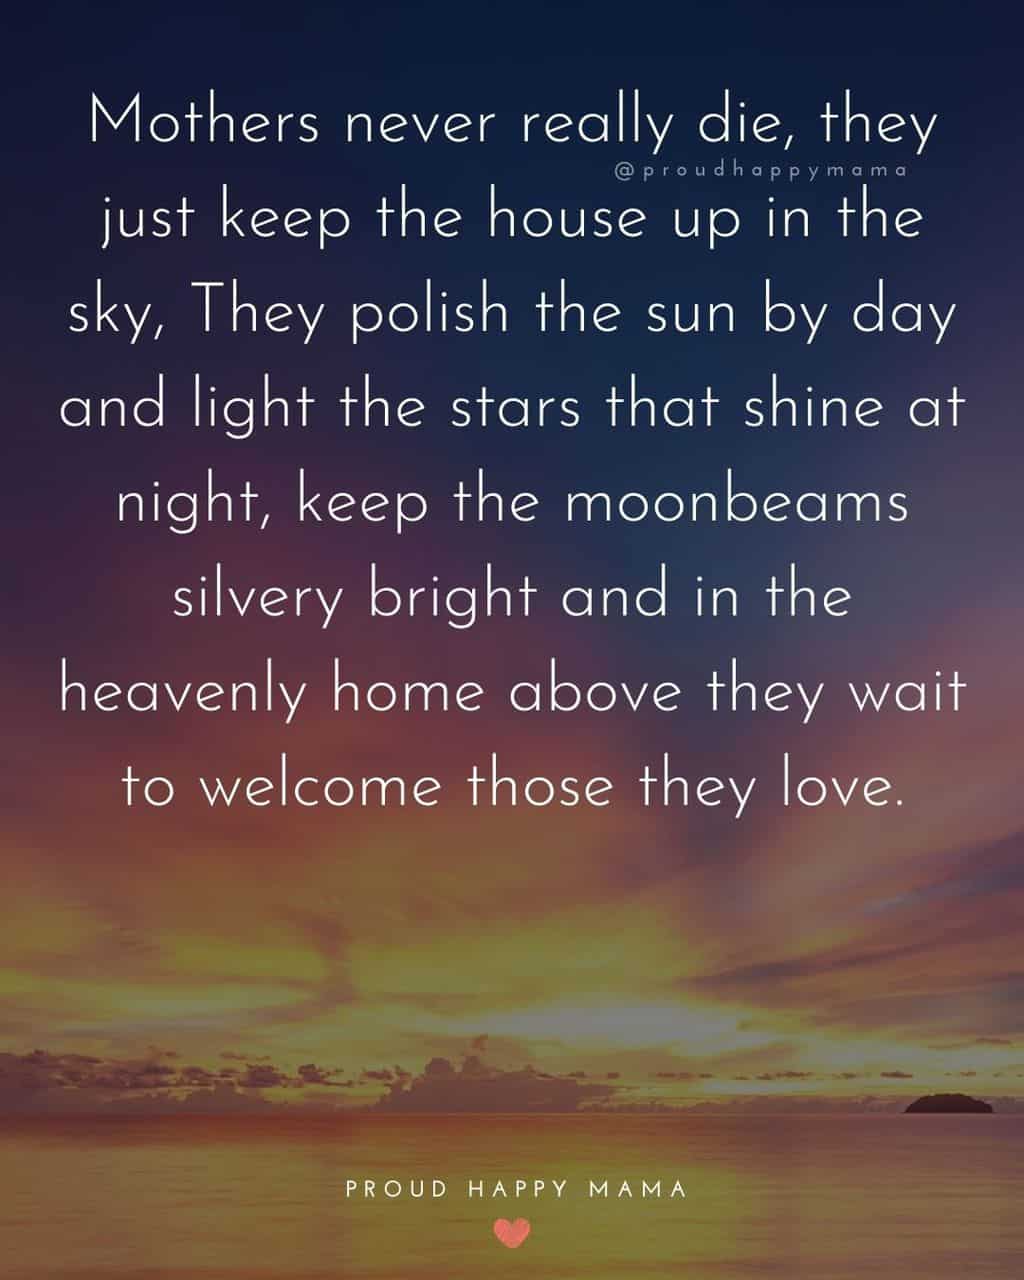 Sun setting over ocean with small island in the background with text overlay, ‘Mothers never really die, they just keep the house up in the sky, They polish the sun by day and light the stars that shine at night, keep the moonbeams silvery bright and in the heavenly home above they wait to welcome those they love.’